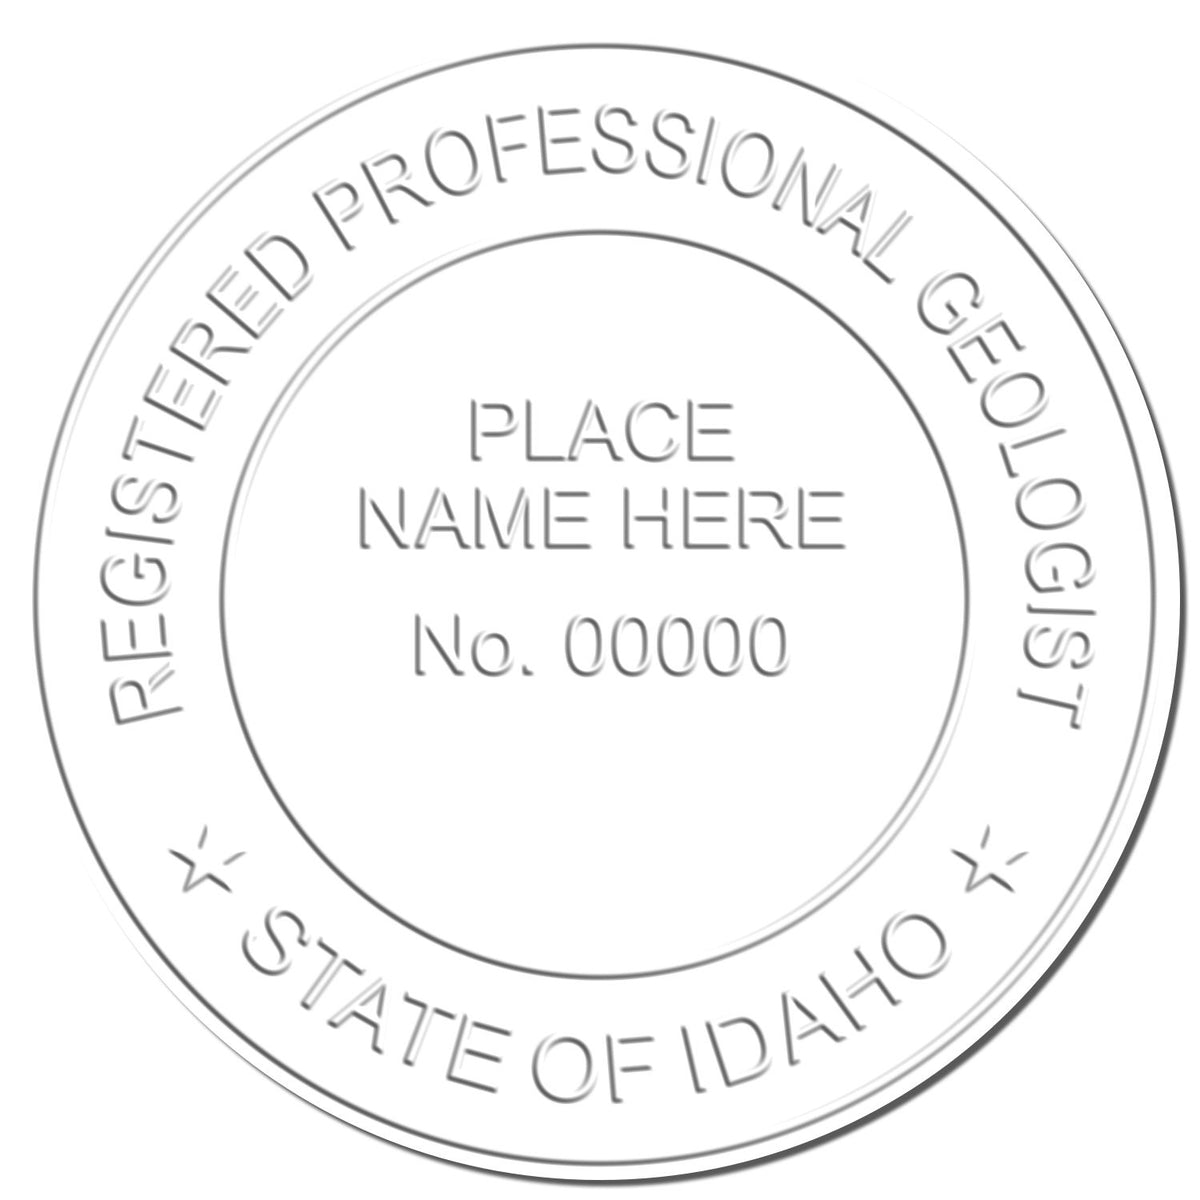 A photograph of the Hybrid Idaho Geologist Seal stamp impression reveals a vivid, professional image of the on paper.